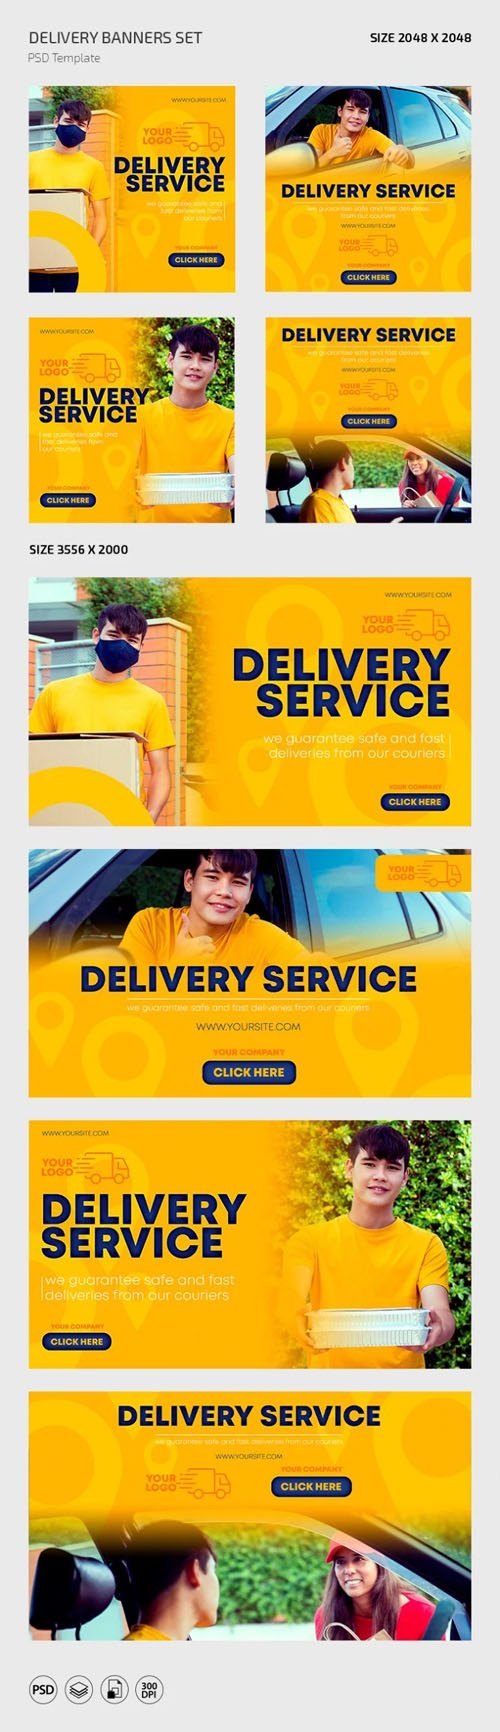 8 Delivery Banners PSD Templates